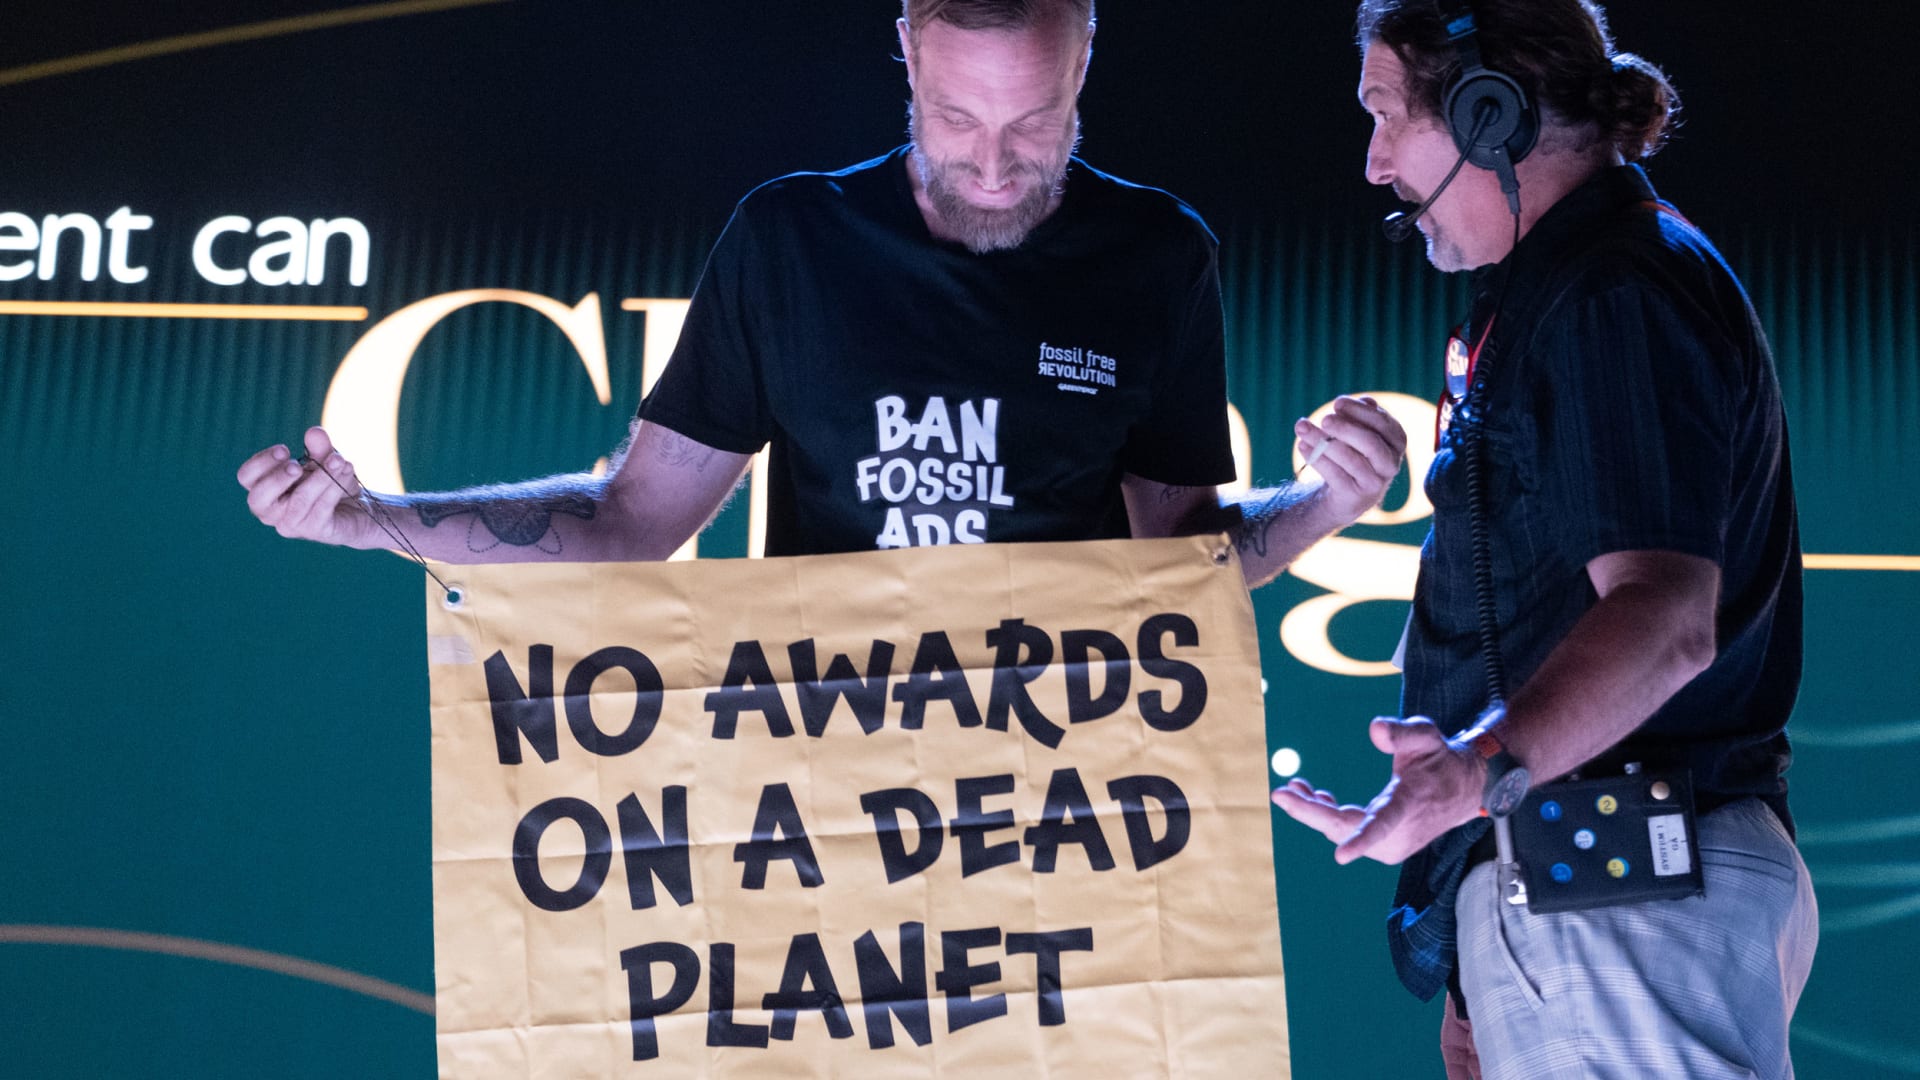 To protest the use of fossil fuels Gustav Martner interrupted the opening ceremony in Cannes to give back an award he won 15 years ago.